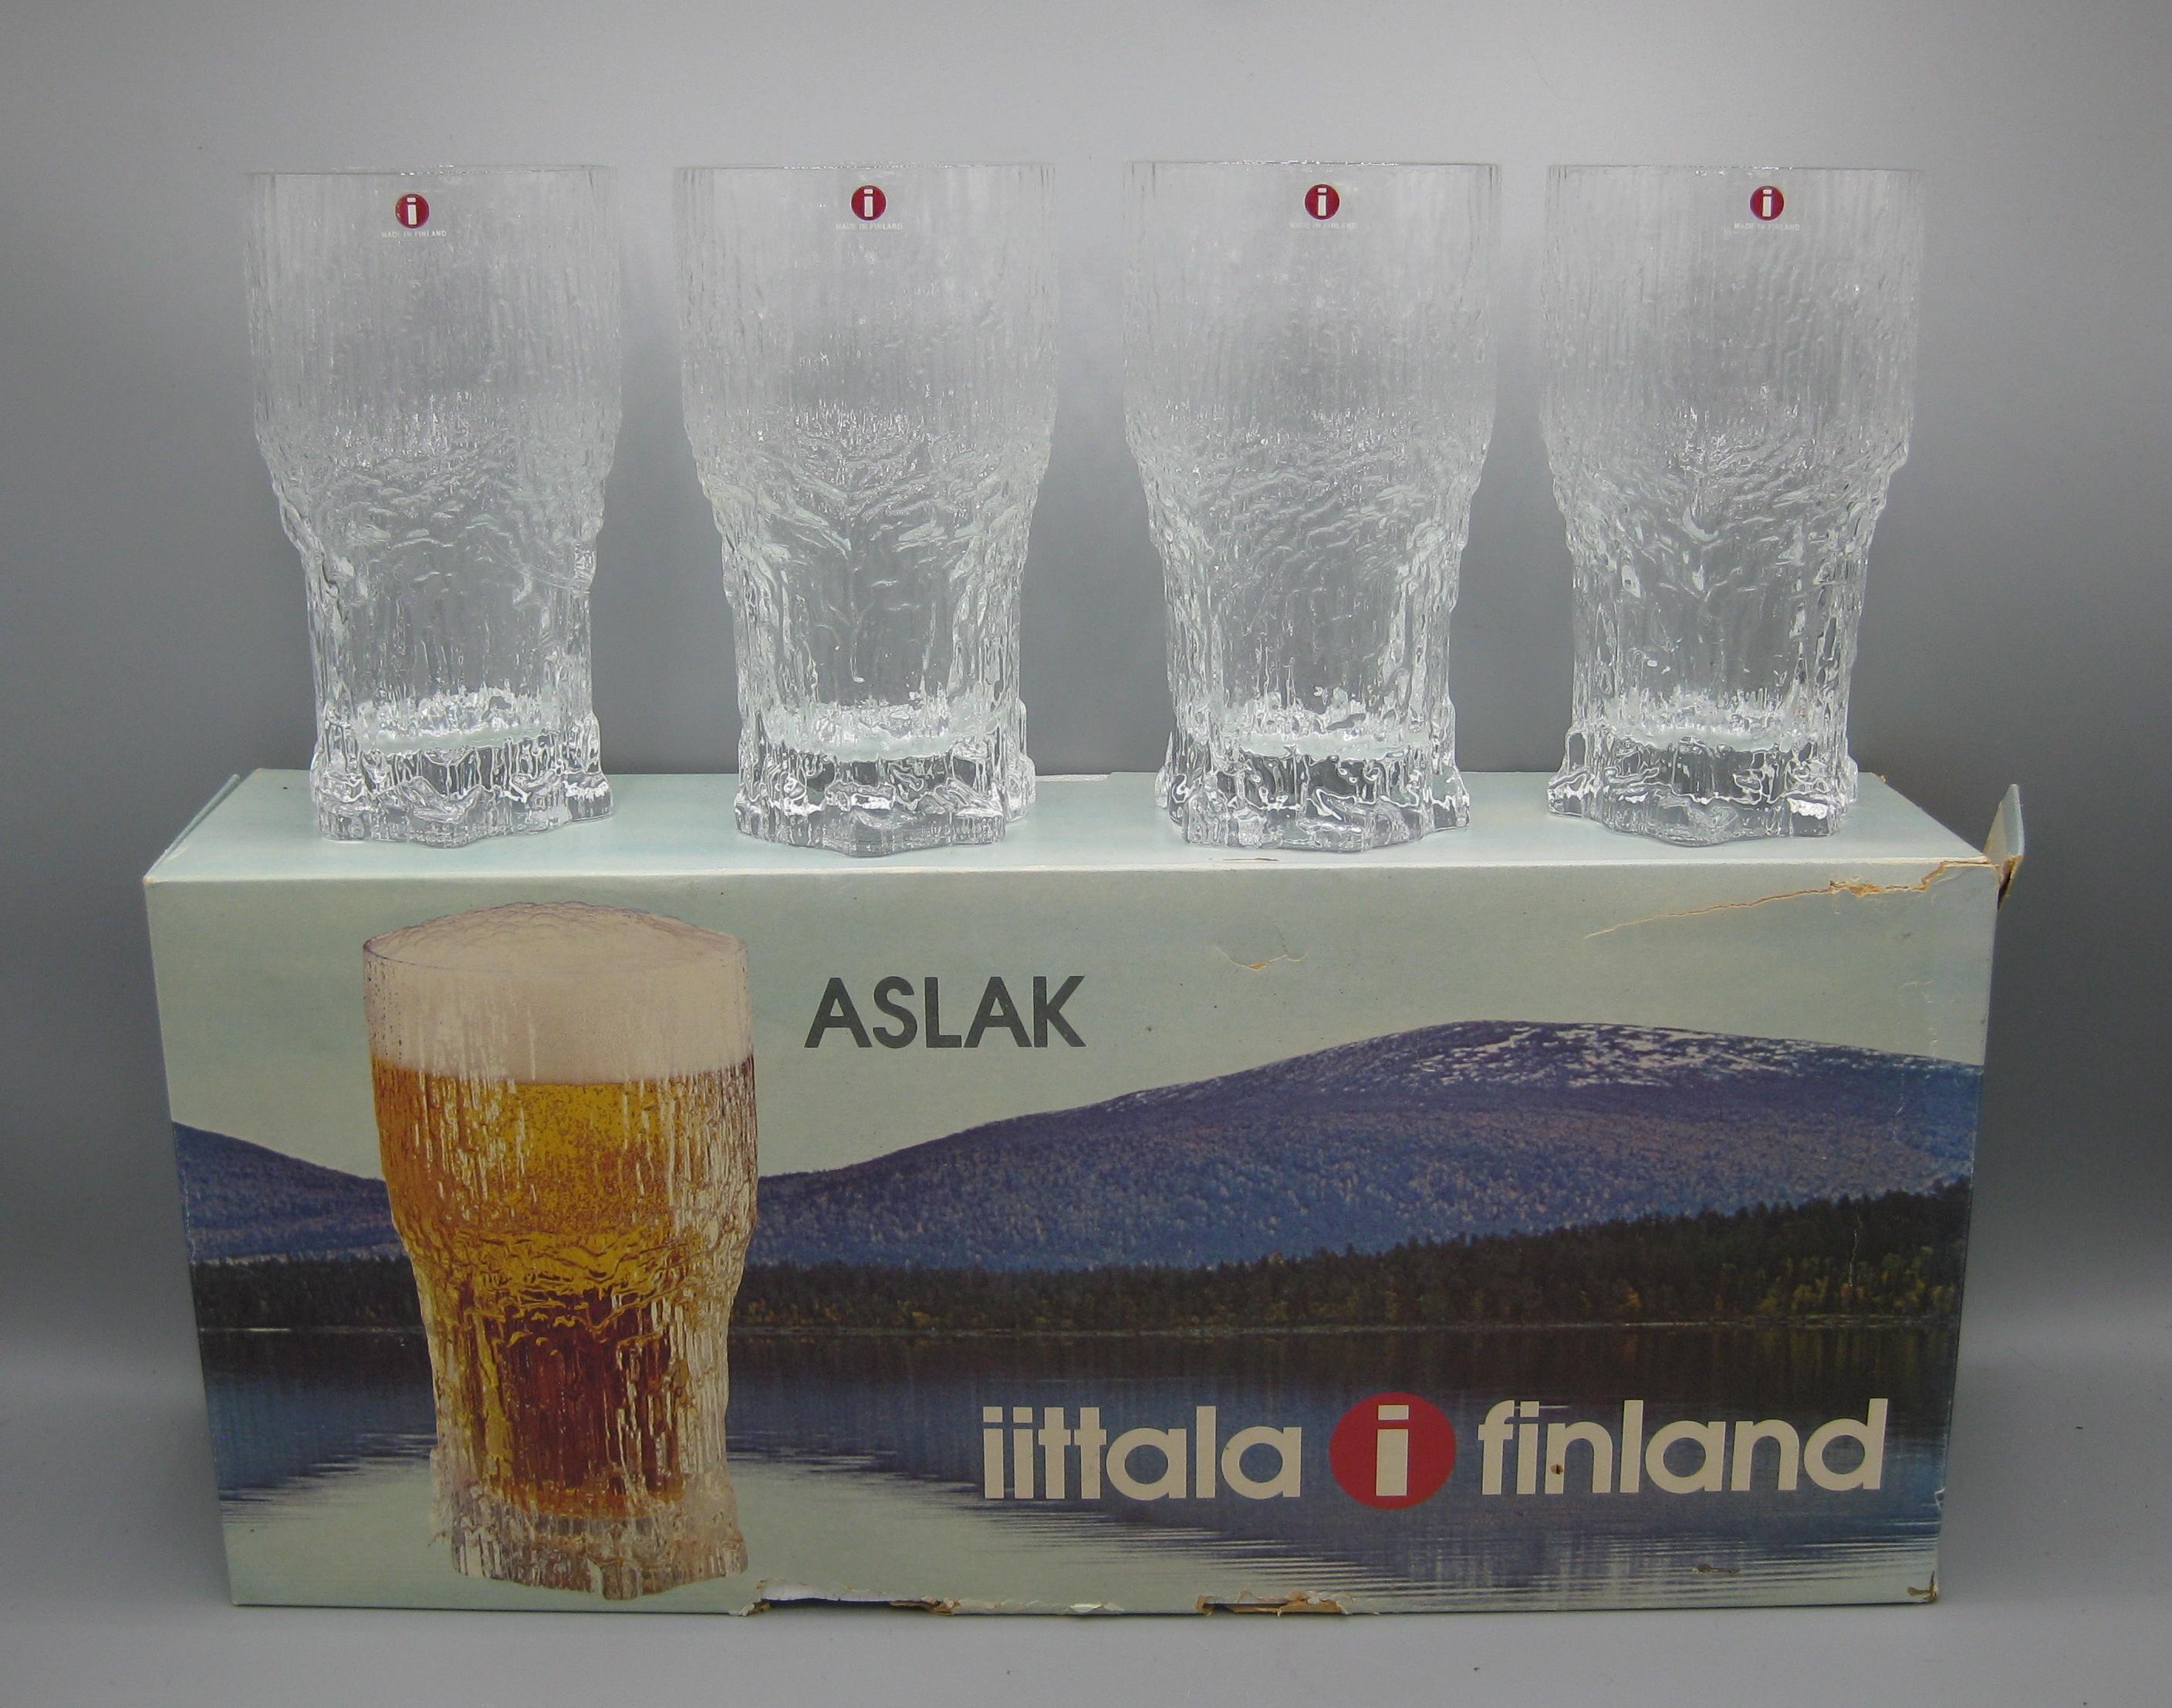 Rare set of 4 original iittala of Finland Aslak 14 1/2 ounce tall beer glasses. and date from the 1960's. These are new old stock and have never been used. They come in the original box and still has the original stickers on each glass. Designed by